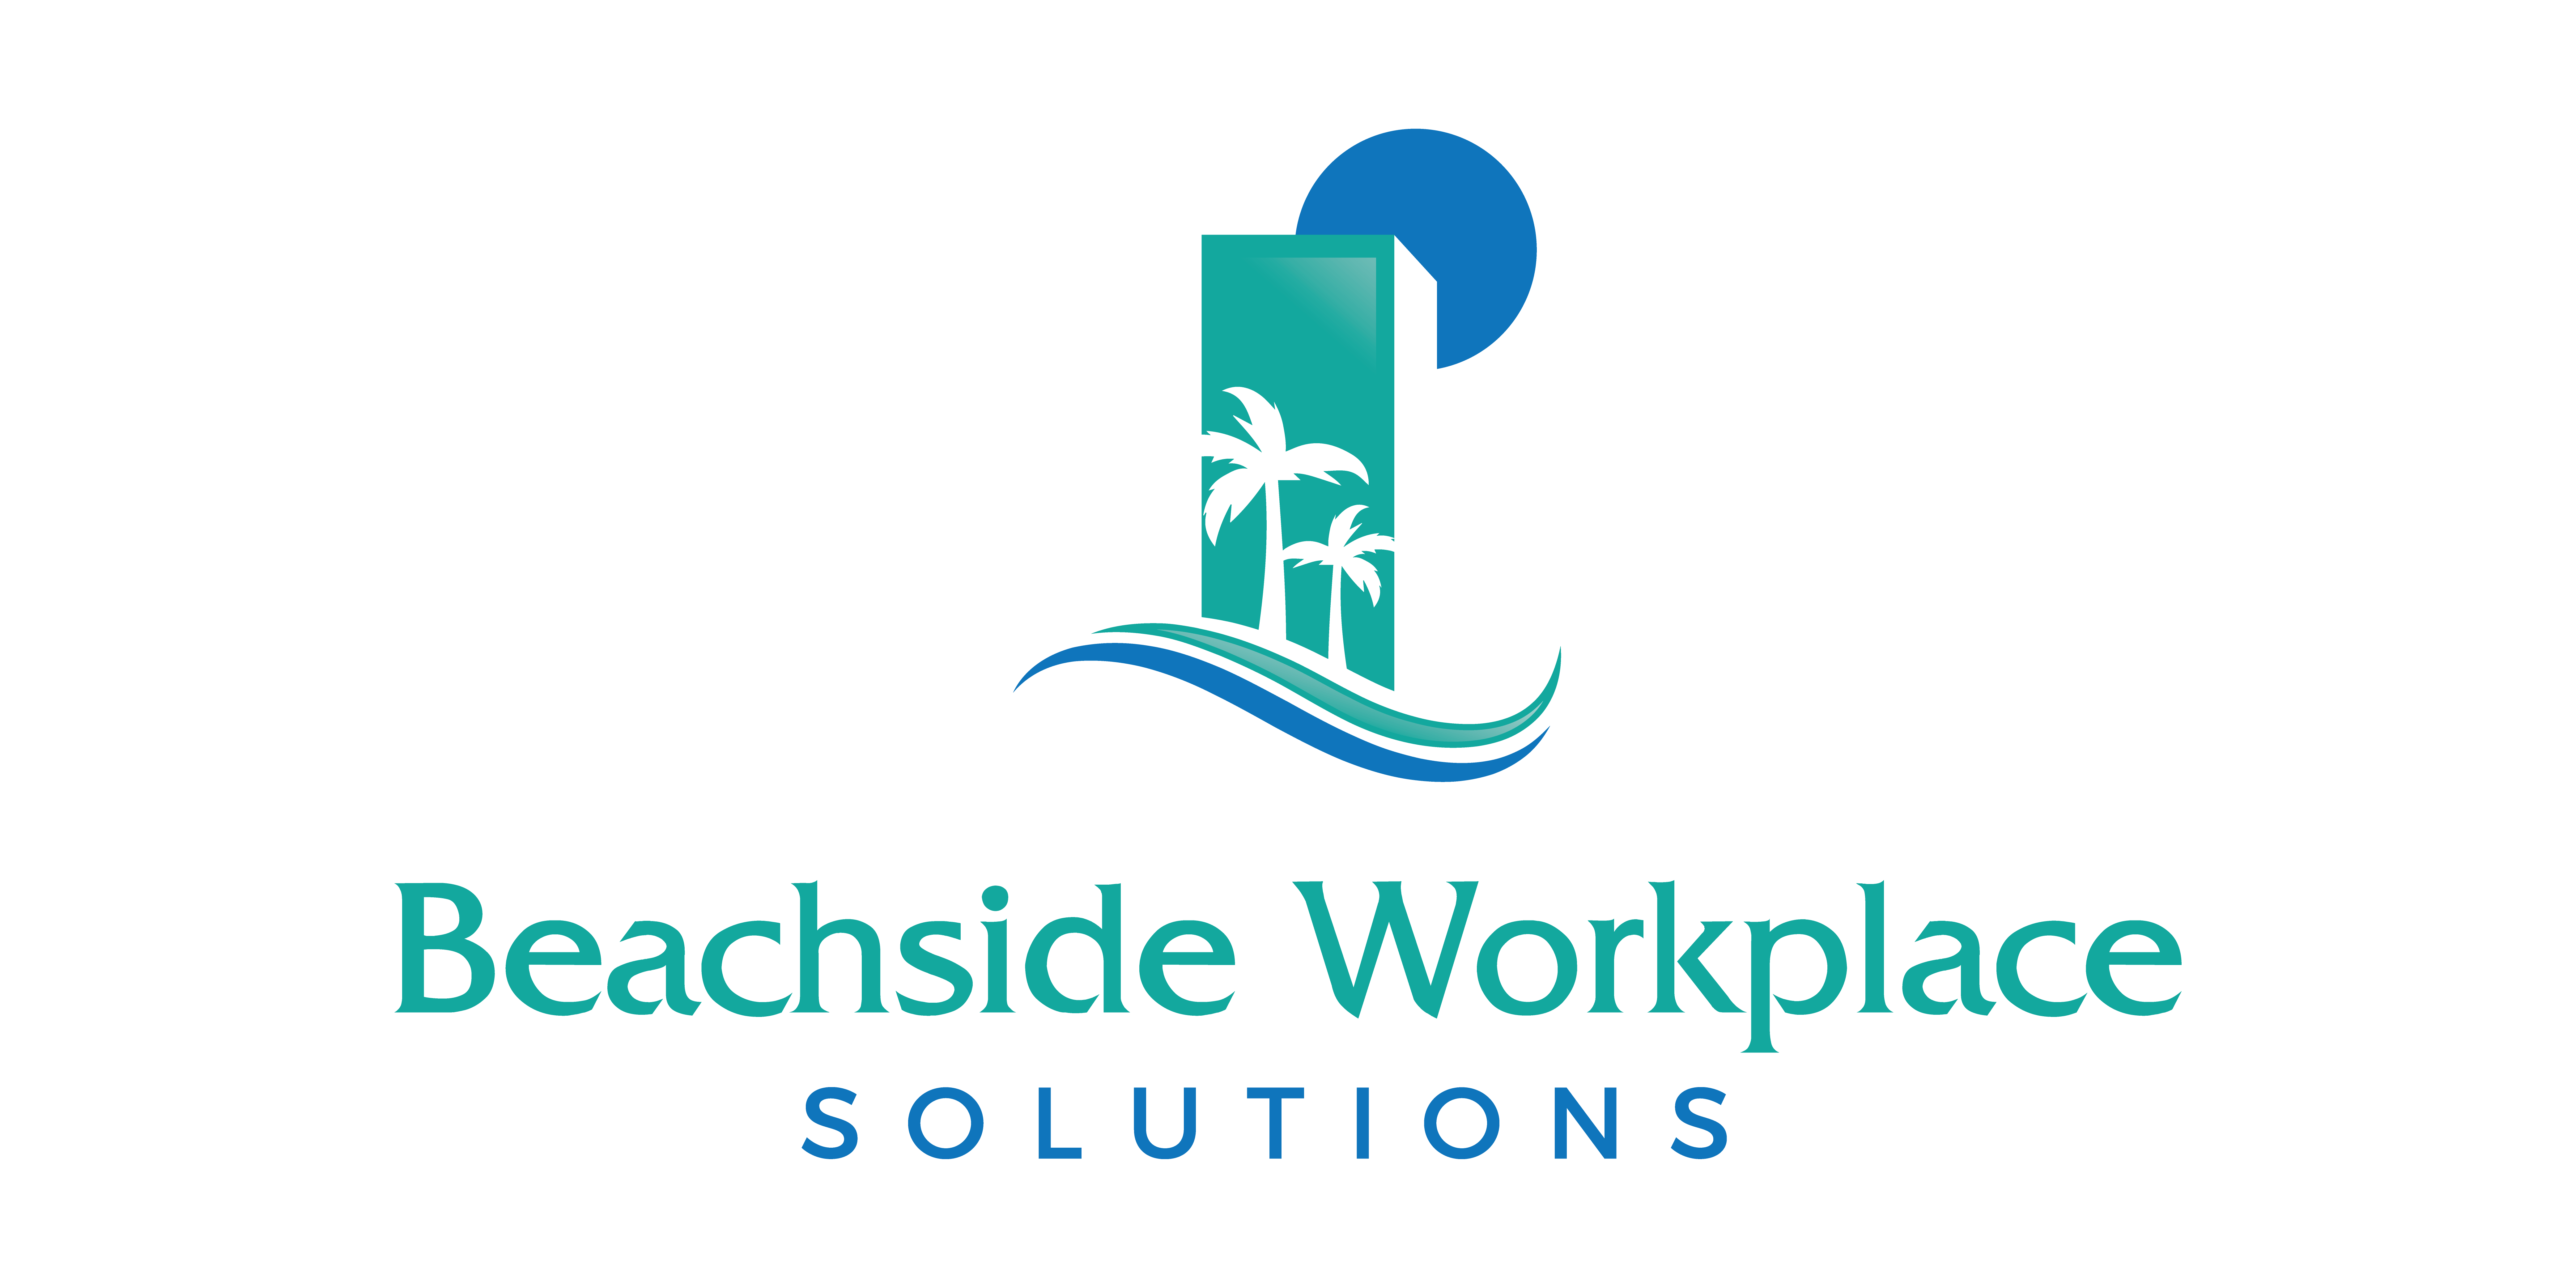 Beachside Workplace Solutions